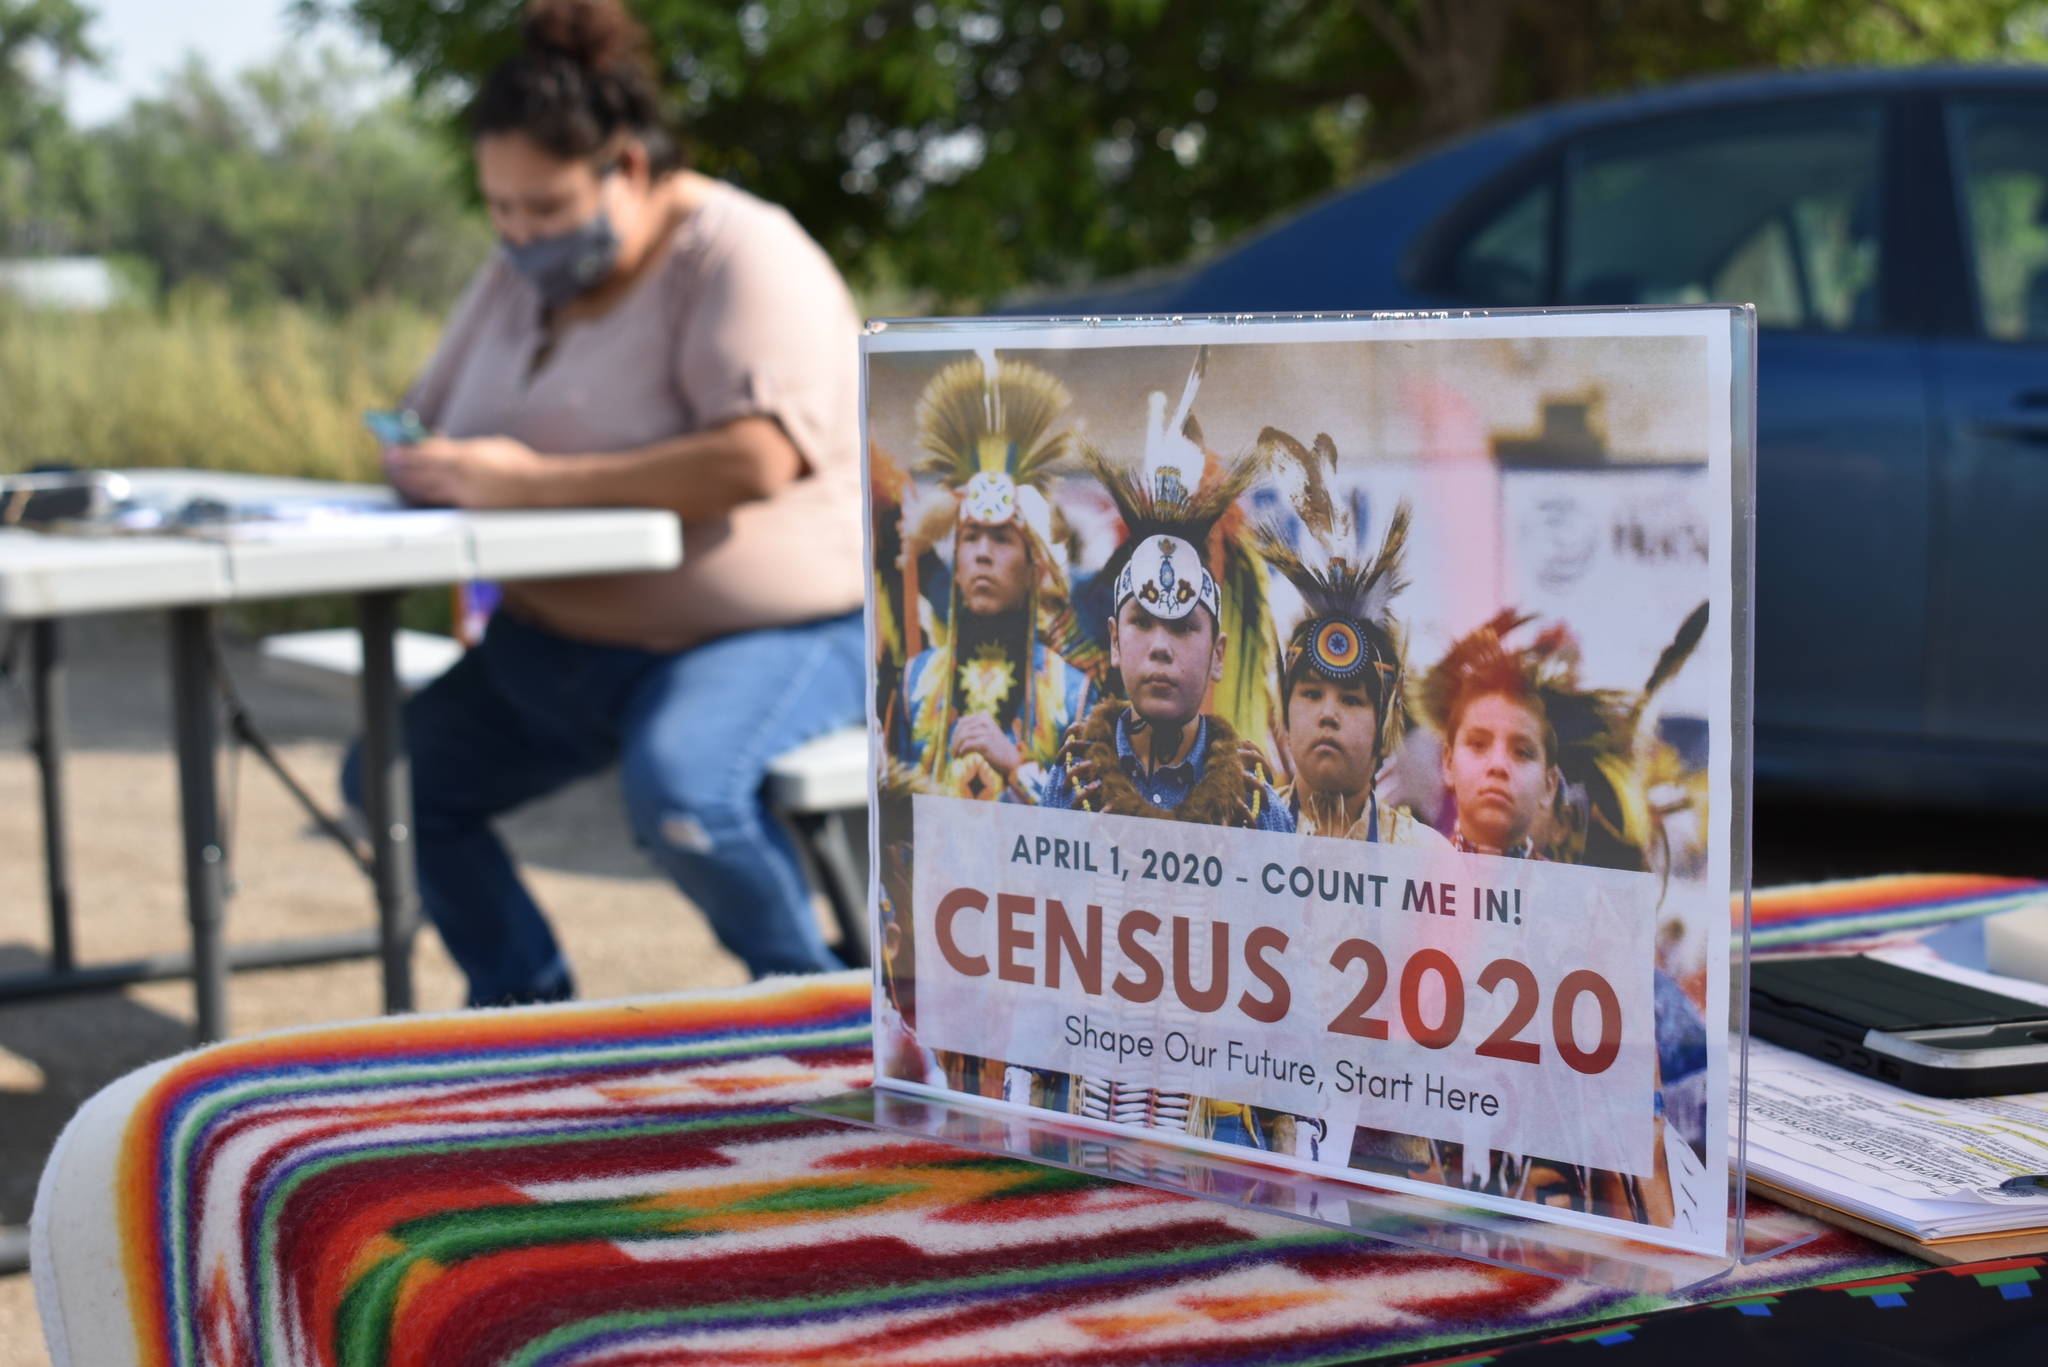 A sign promoting Native American participation in the U.S. census is displayed as Selena Rides Horse enters information into her phone on behalf of a member of the Crow Indian Tribe in Lodge Grass, Mont. on Wednesday, Aug. 26, 2020. There are more than 300 Native American reservations across the country, and almost all lag the rest of the country in participation in the census. (AP Photo / Matthew Brown)